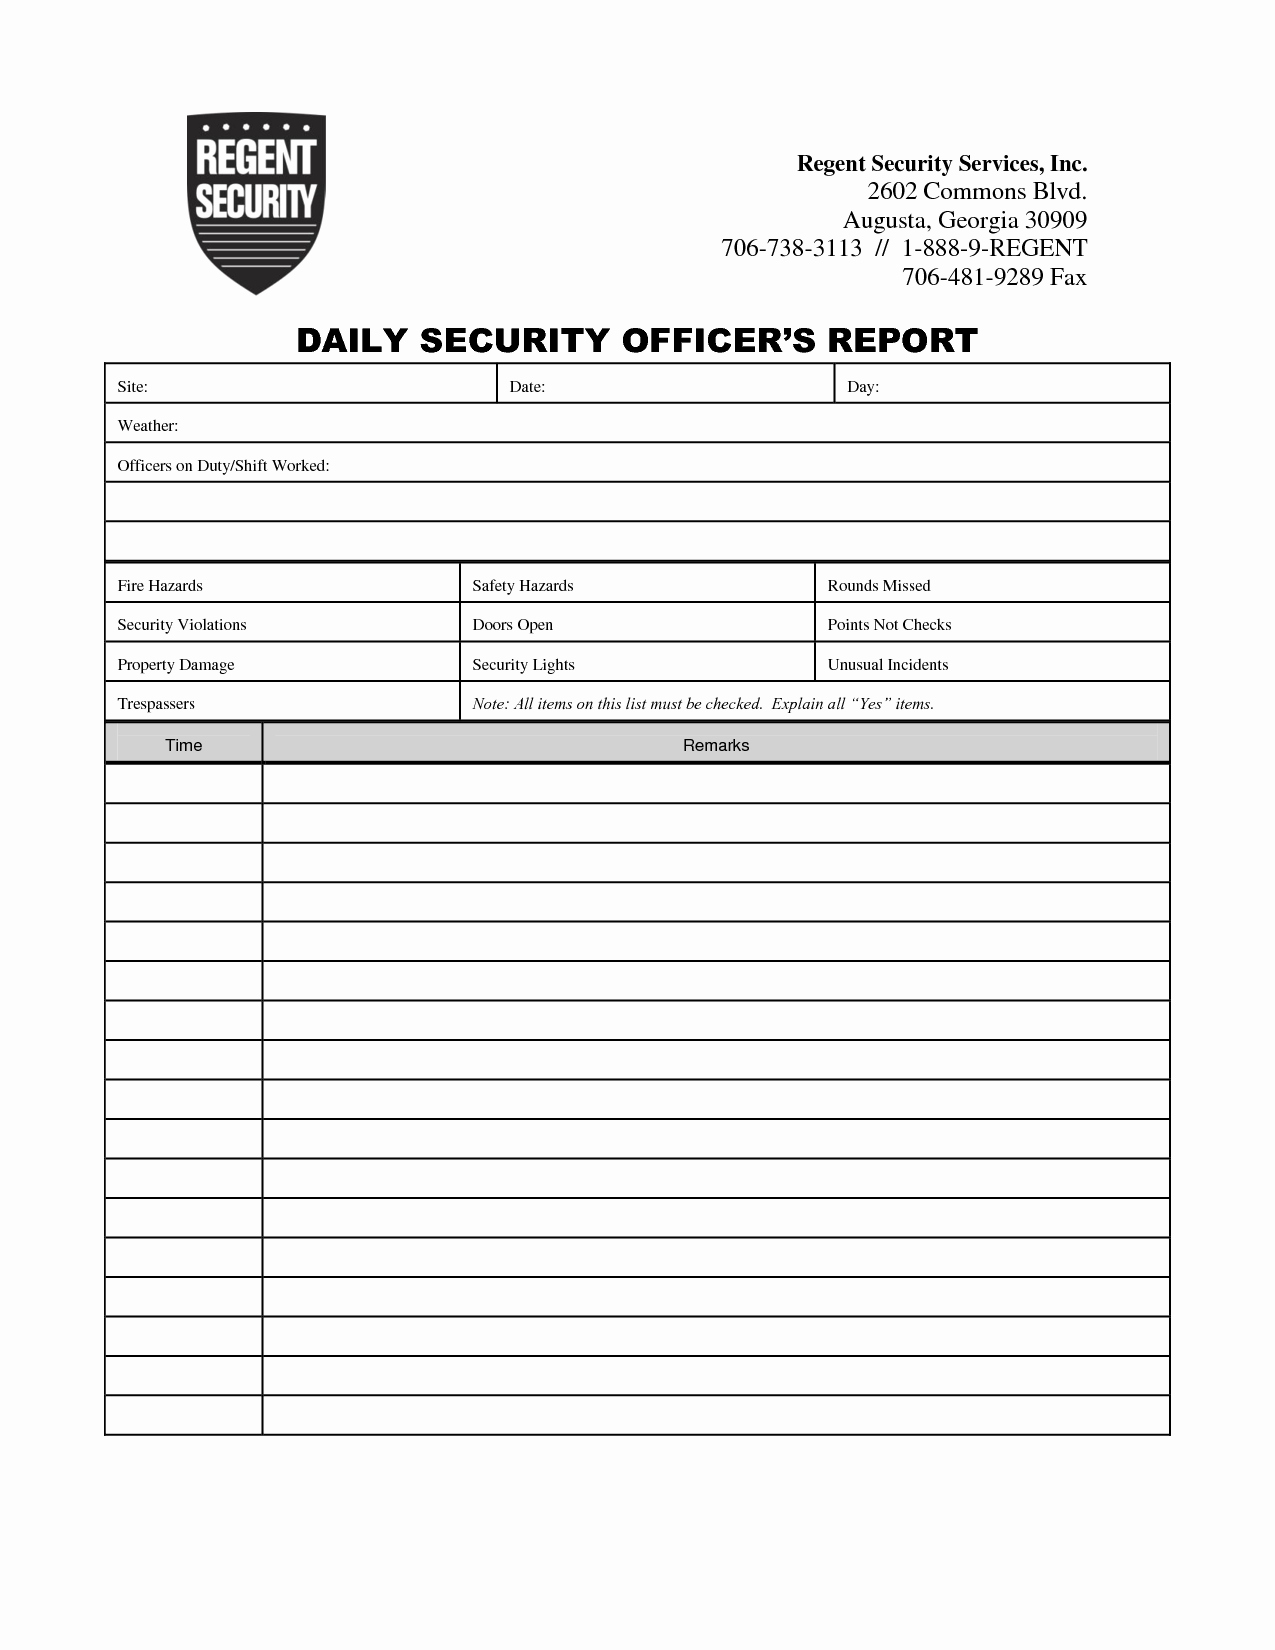 Daily Activity Report Template Awesome Security Guard Daily Activity Report Sample